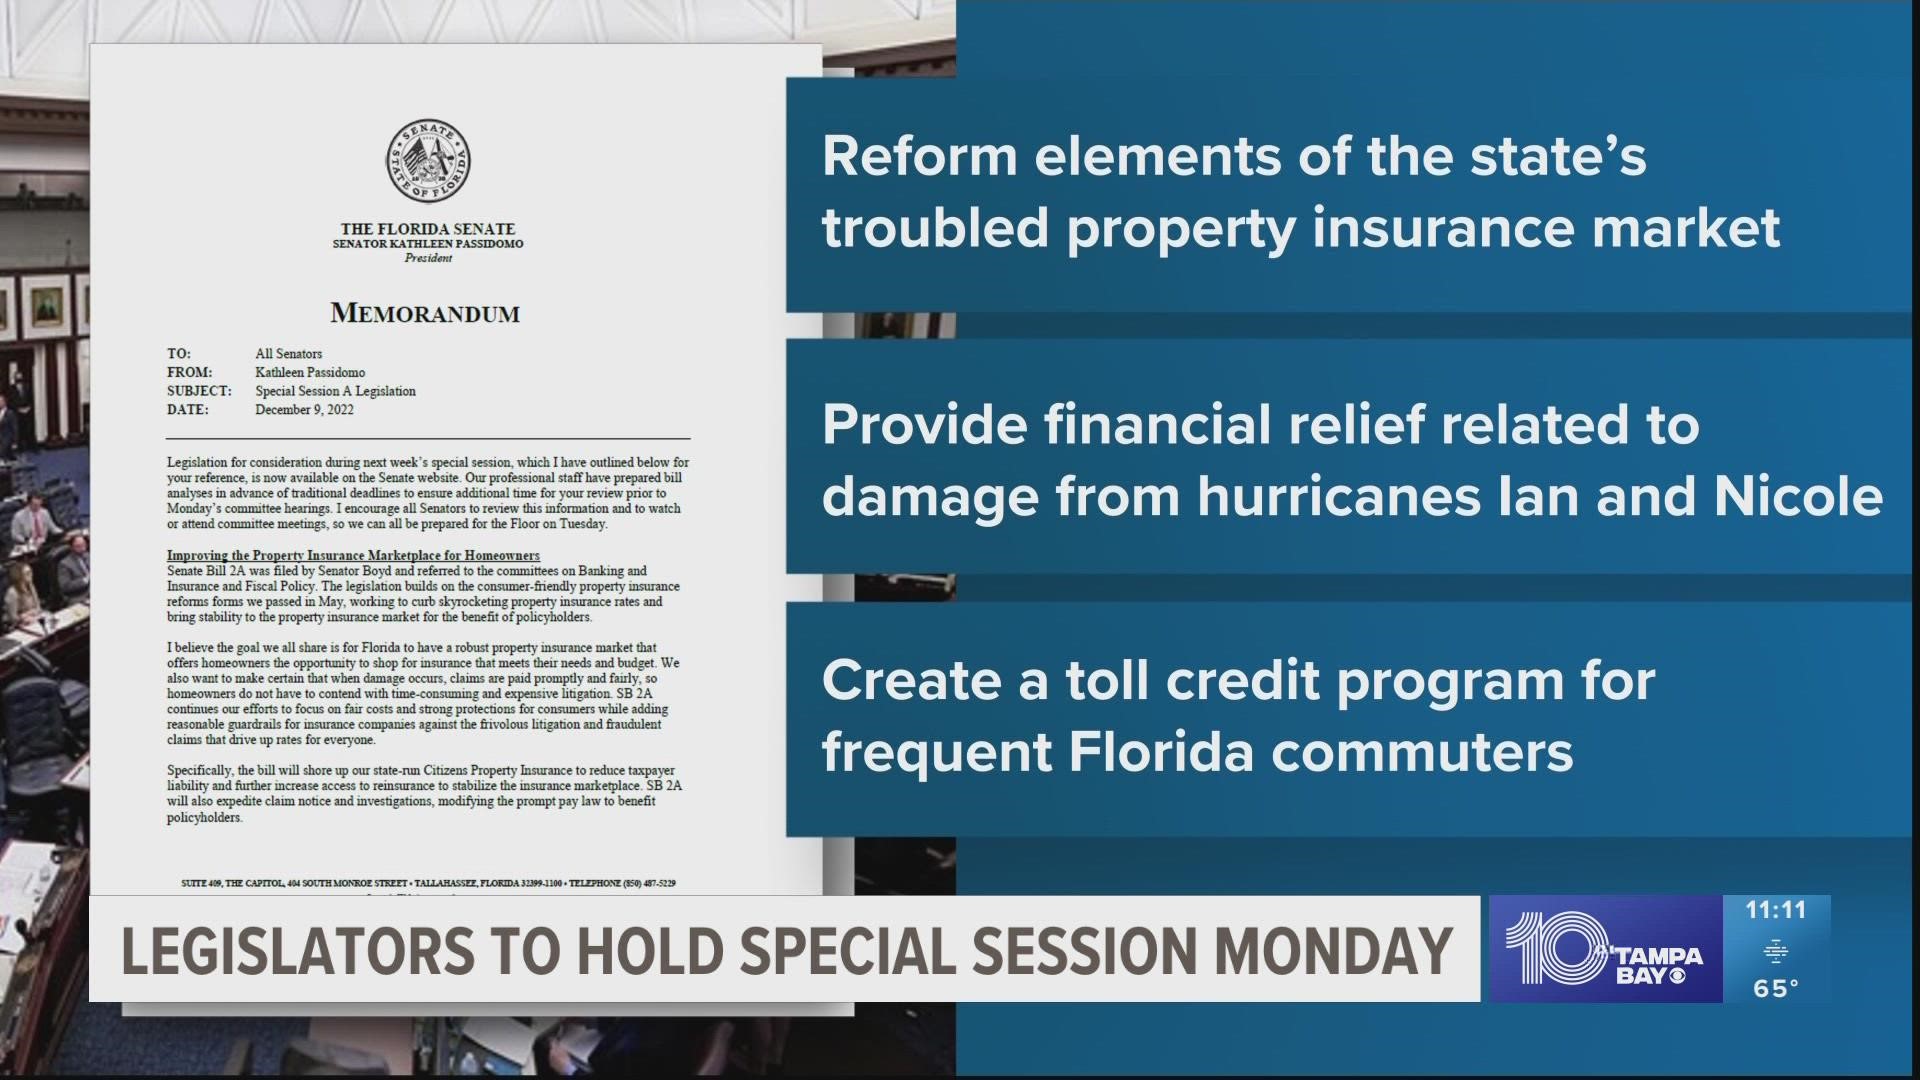 The session comes as Florida's property insurance market has dealt with billions of dollars in losses.